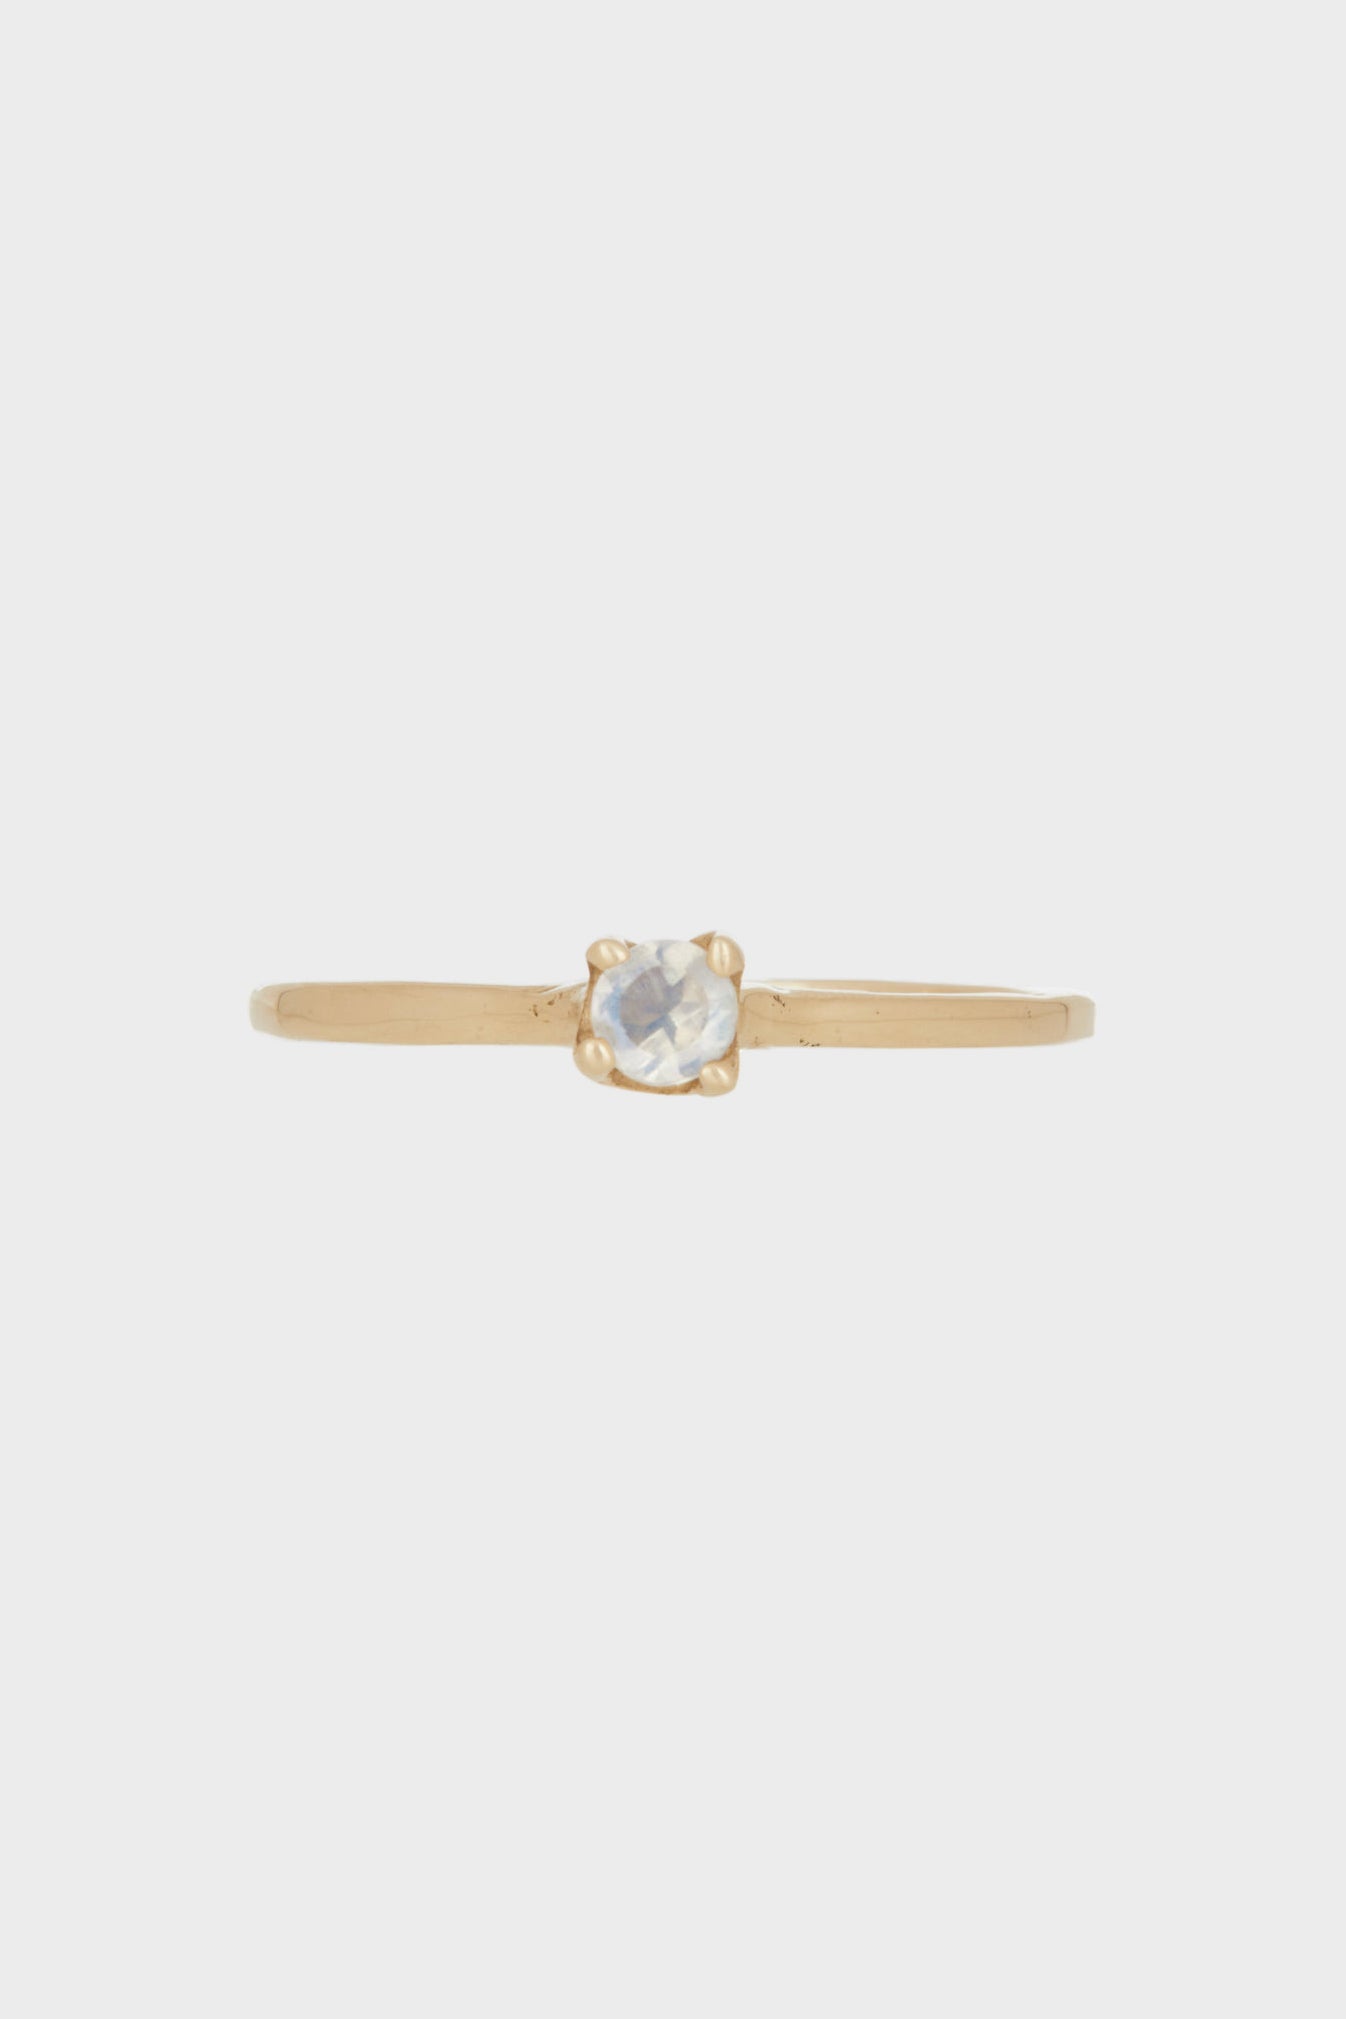 Palace Ring in Moonstone & 14k Yellow Gold